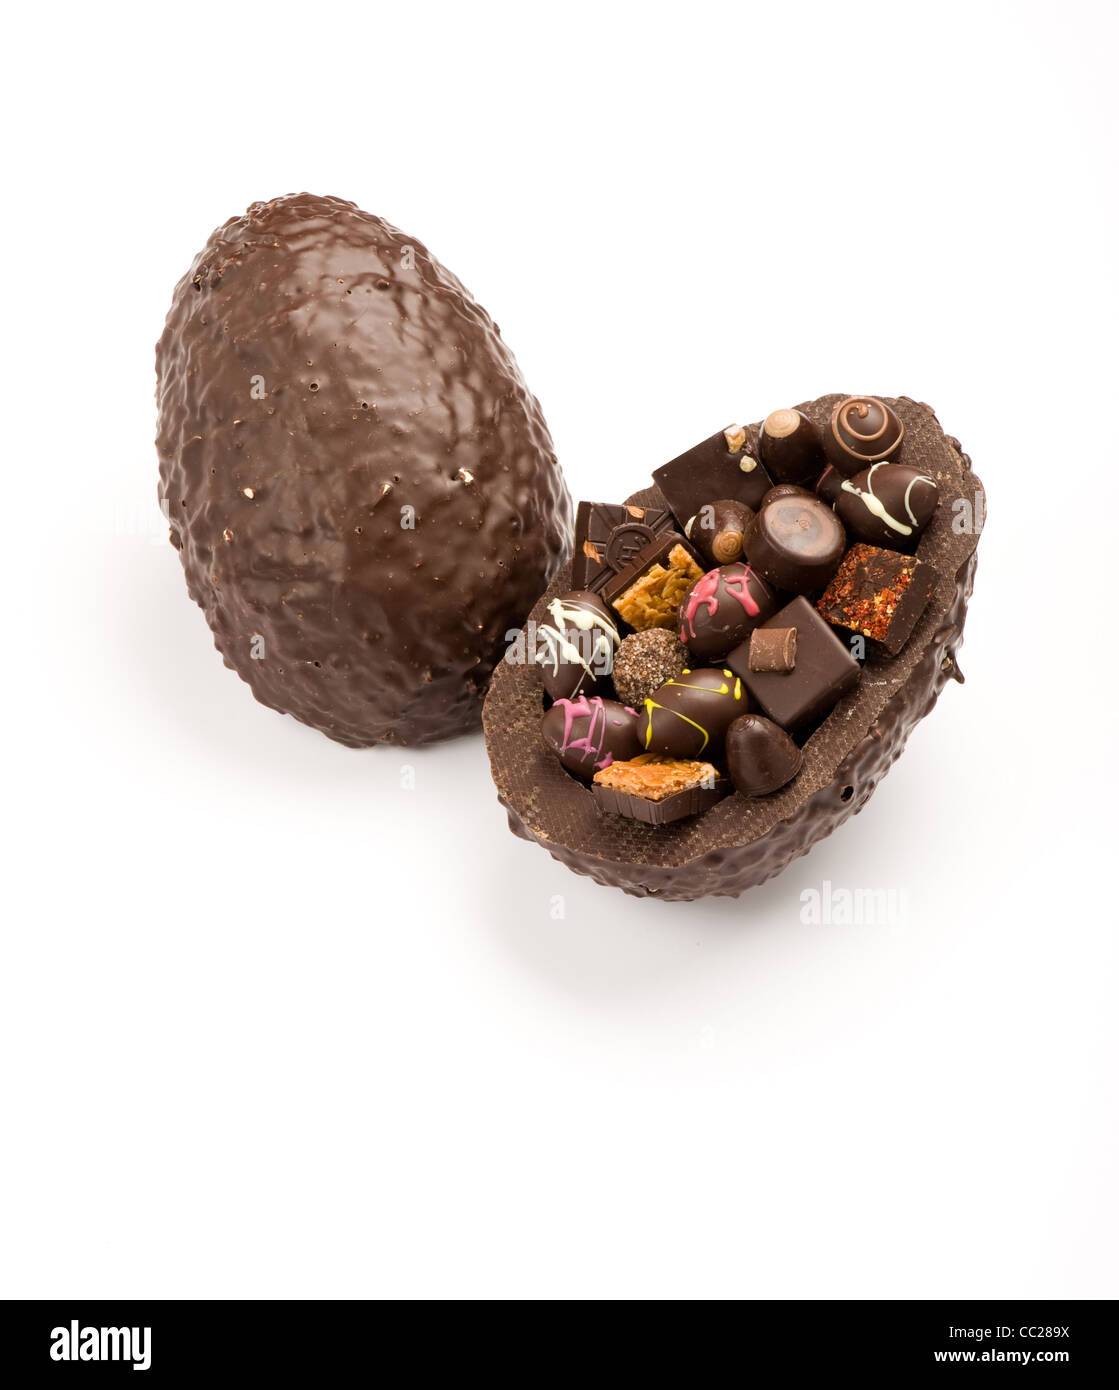 An Easter egg filled with chocolates Stock Photo